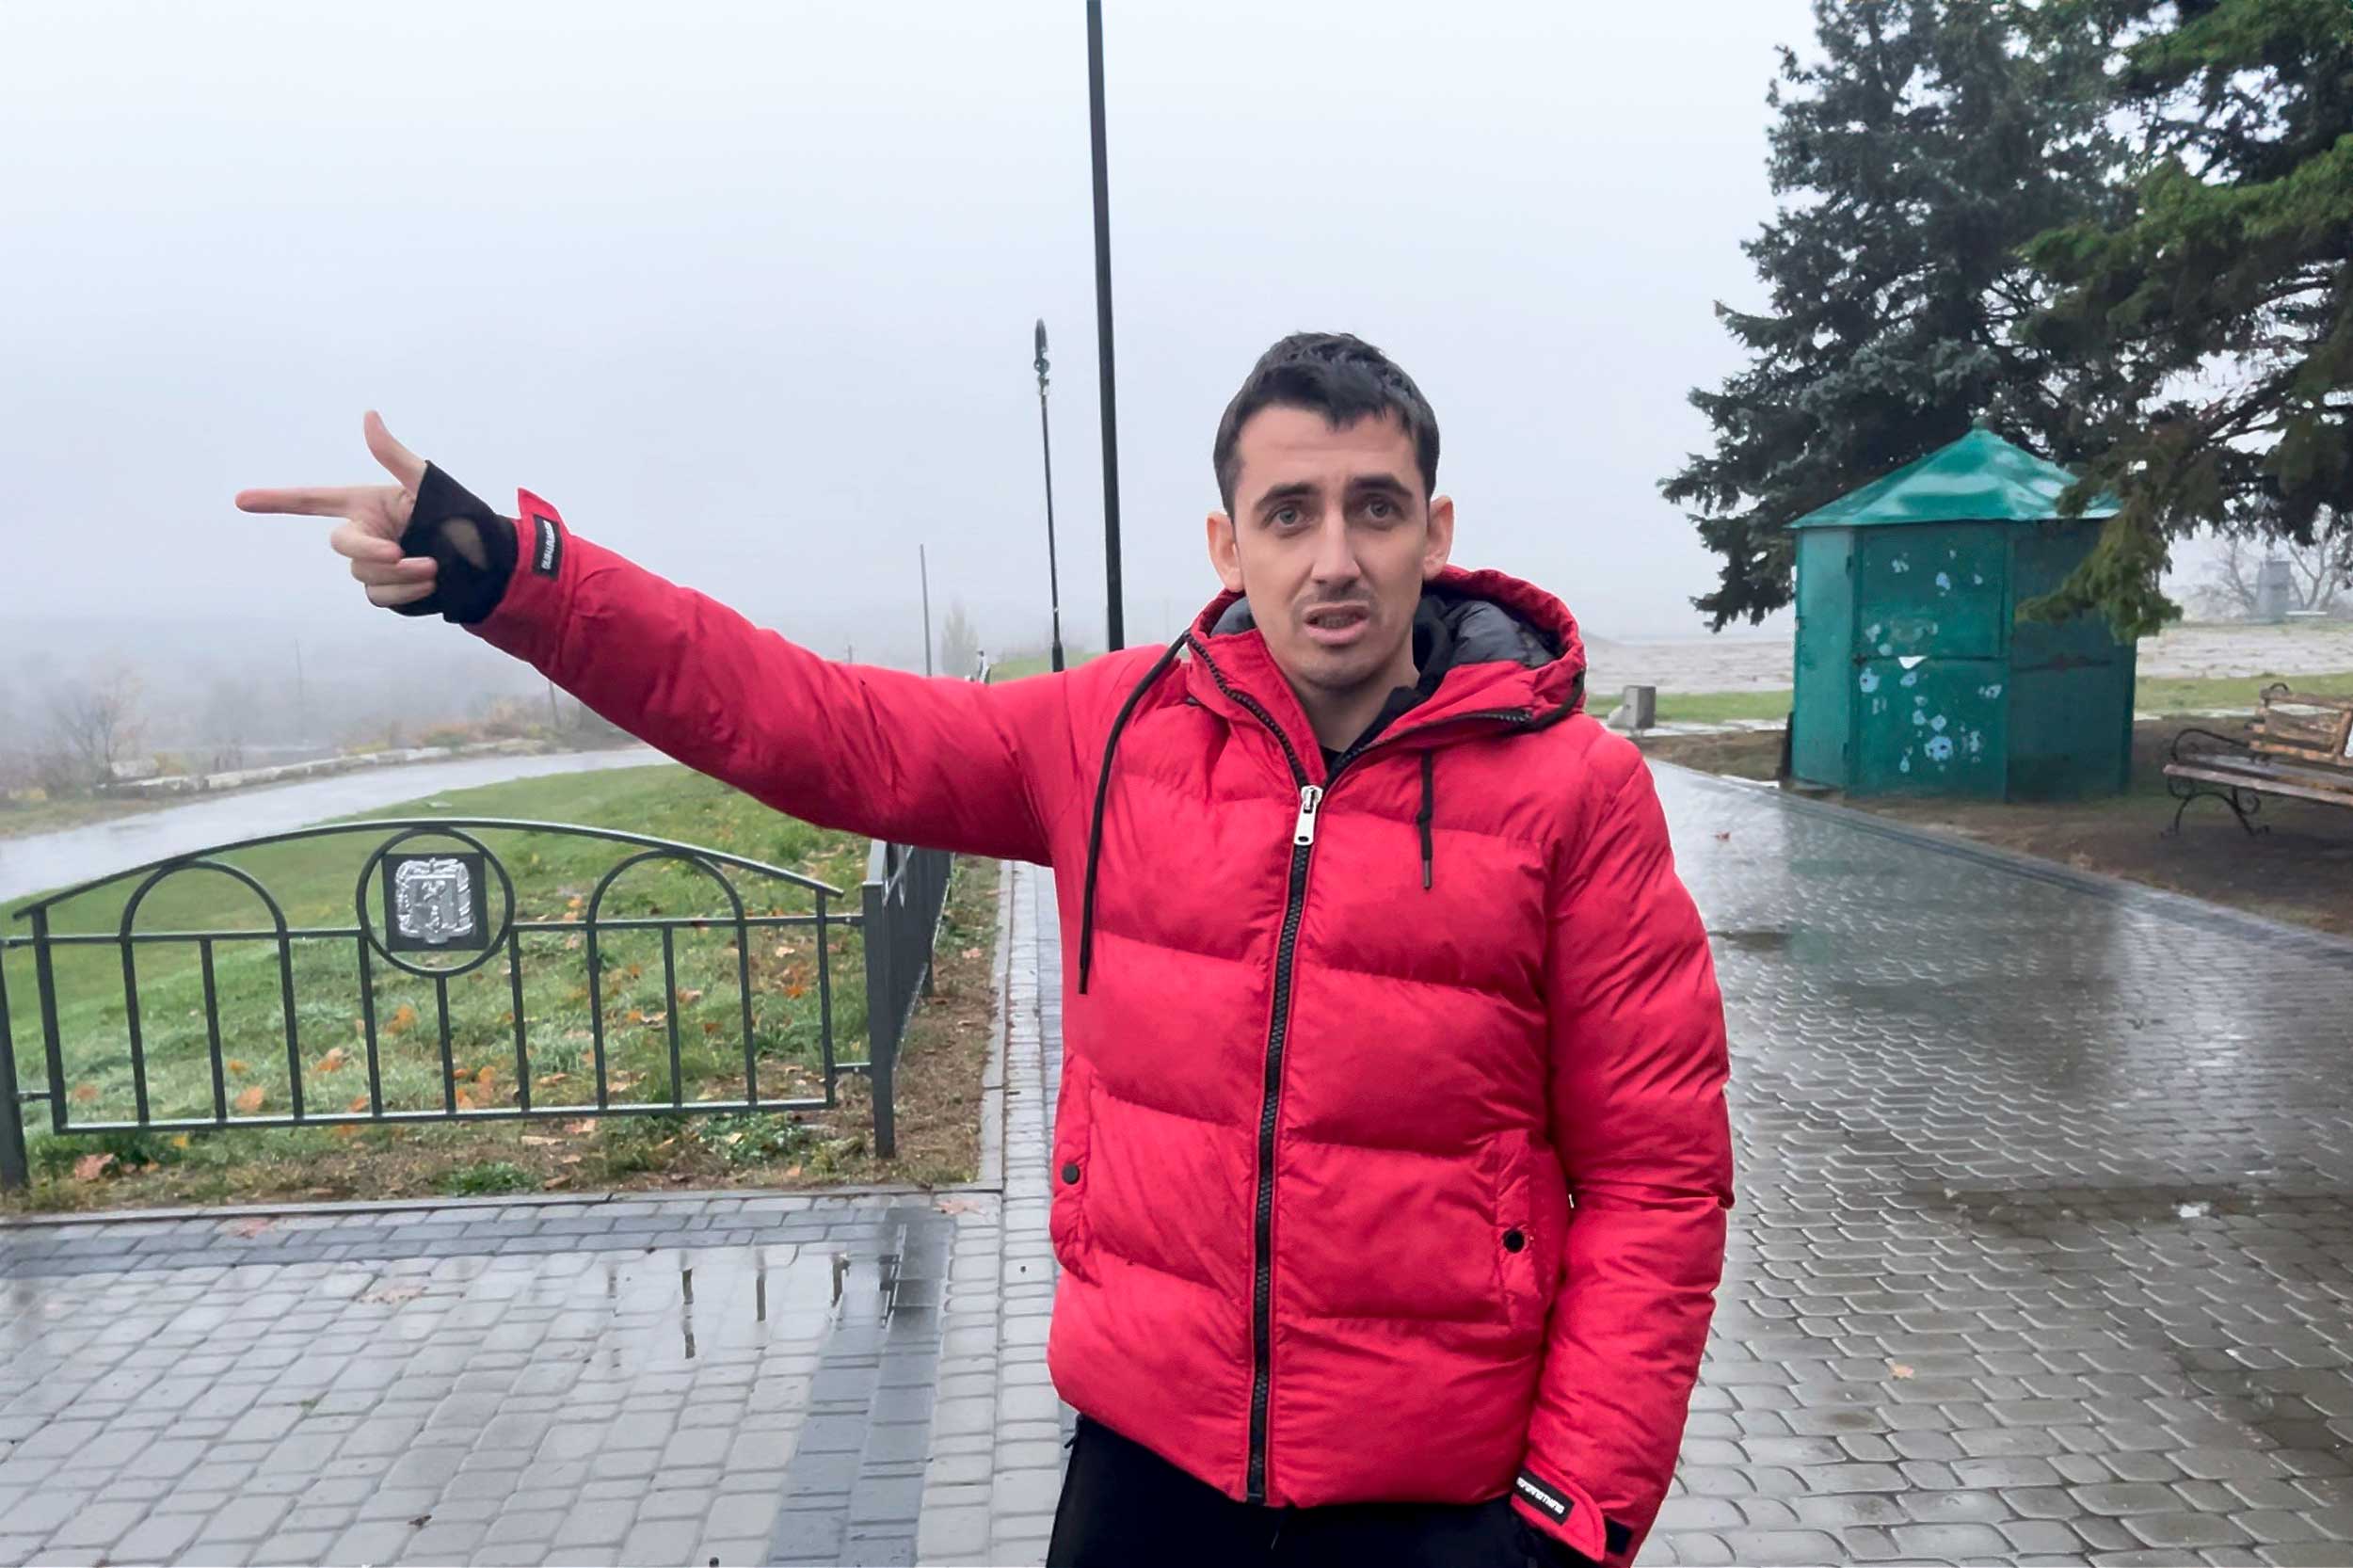 From the town centre, Denys Tsyba, a local humanitarian worker, shows the conflict line during occupation. Locals fear the Russians may return there, and the area is being evacuated. © IWPR